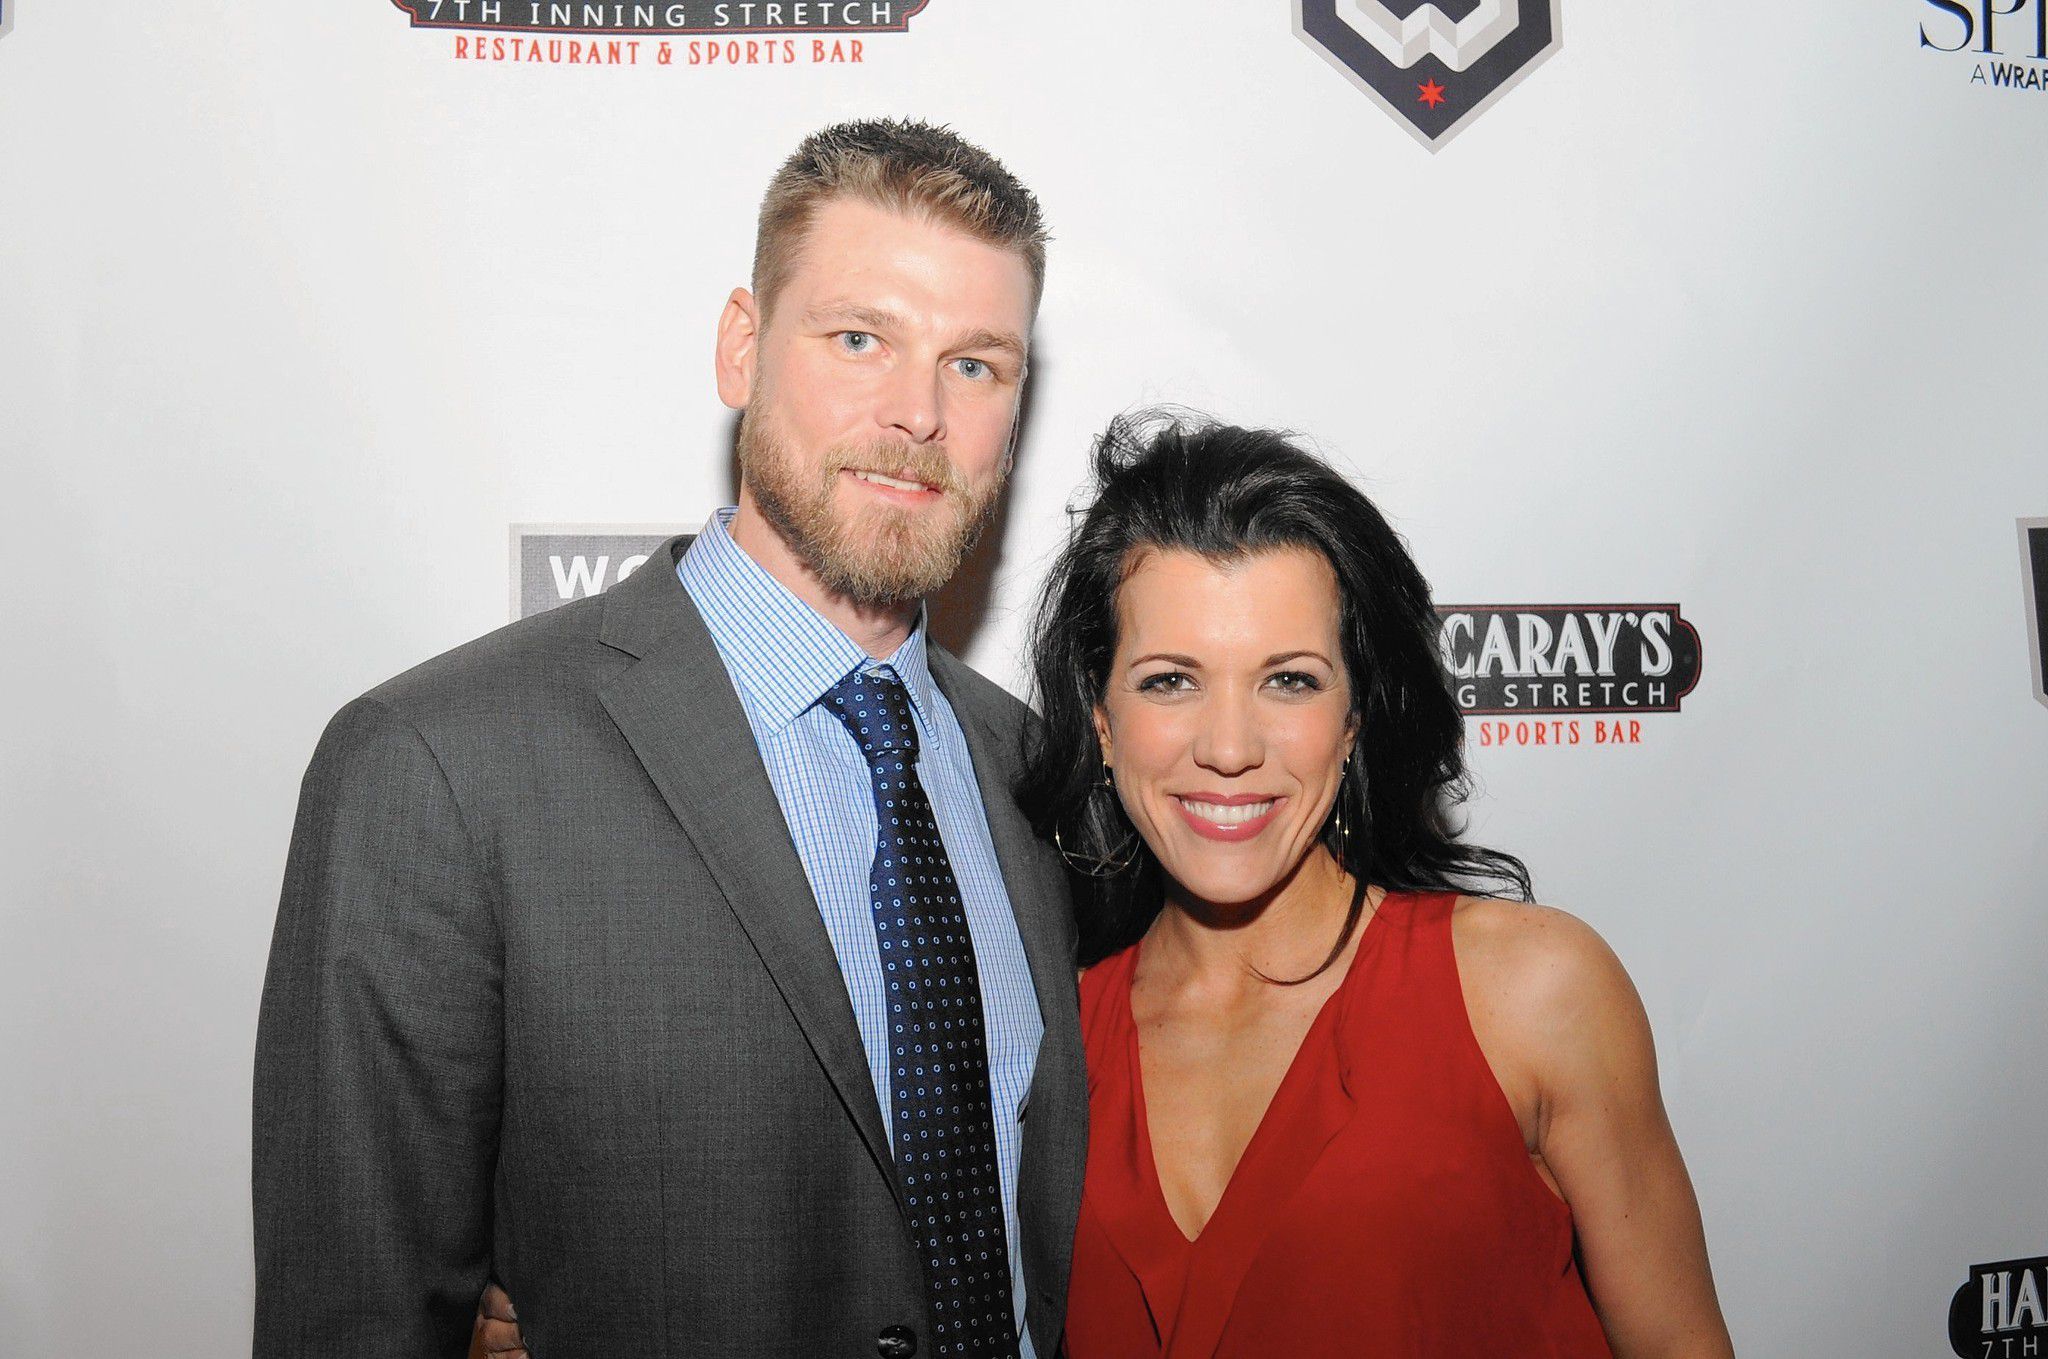 Kerry Wood Celebrity Golf Invitational raises funds for Lurie